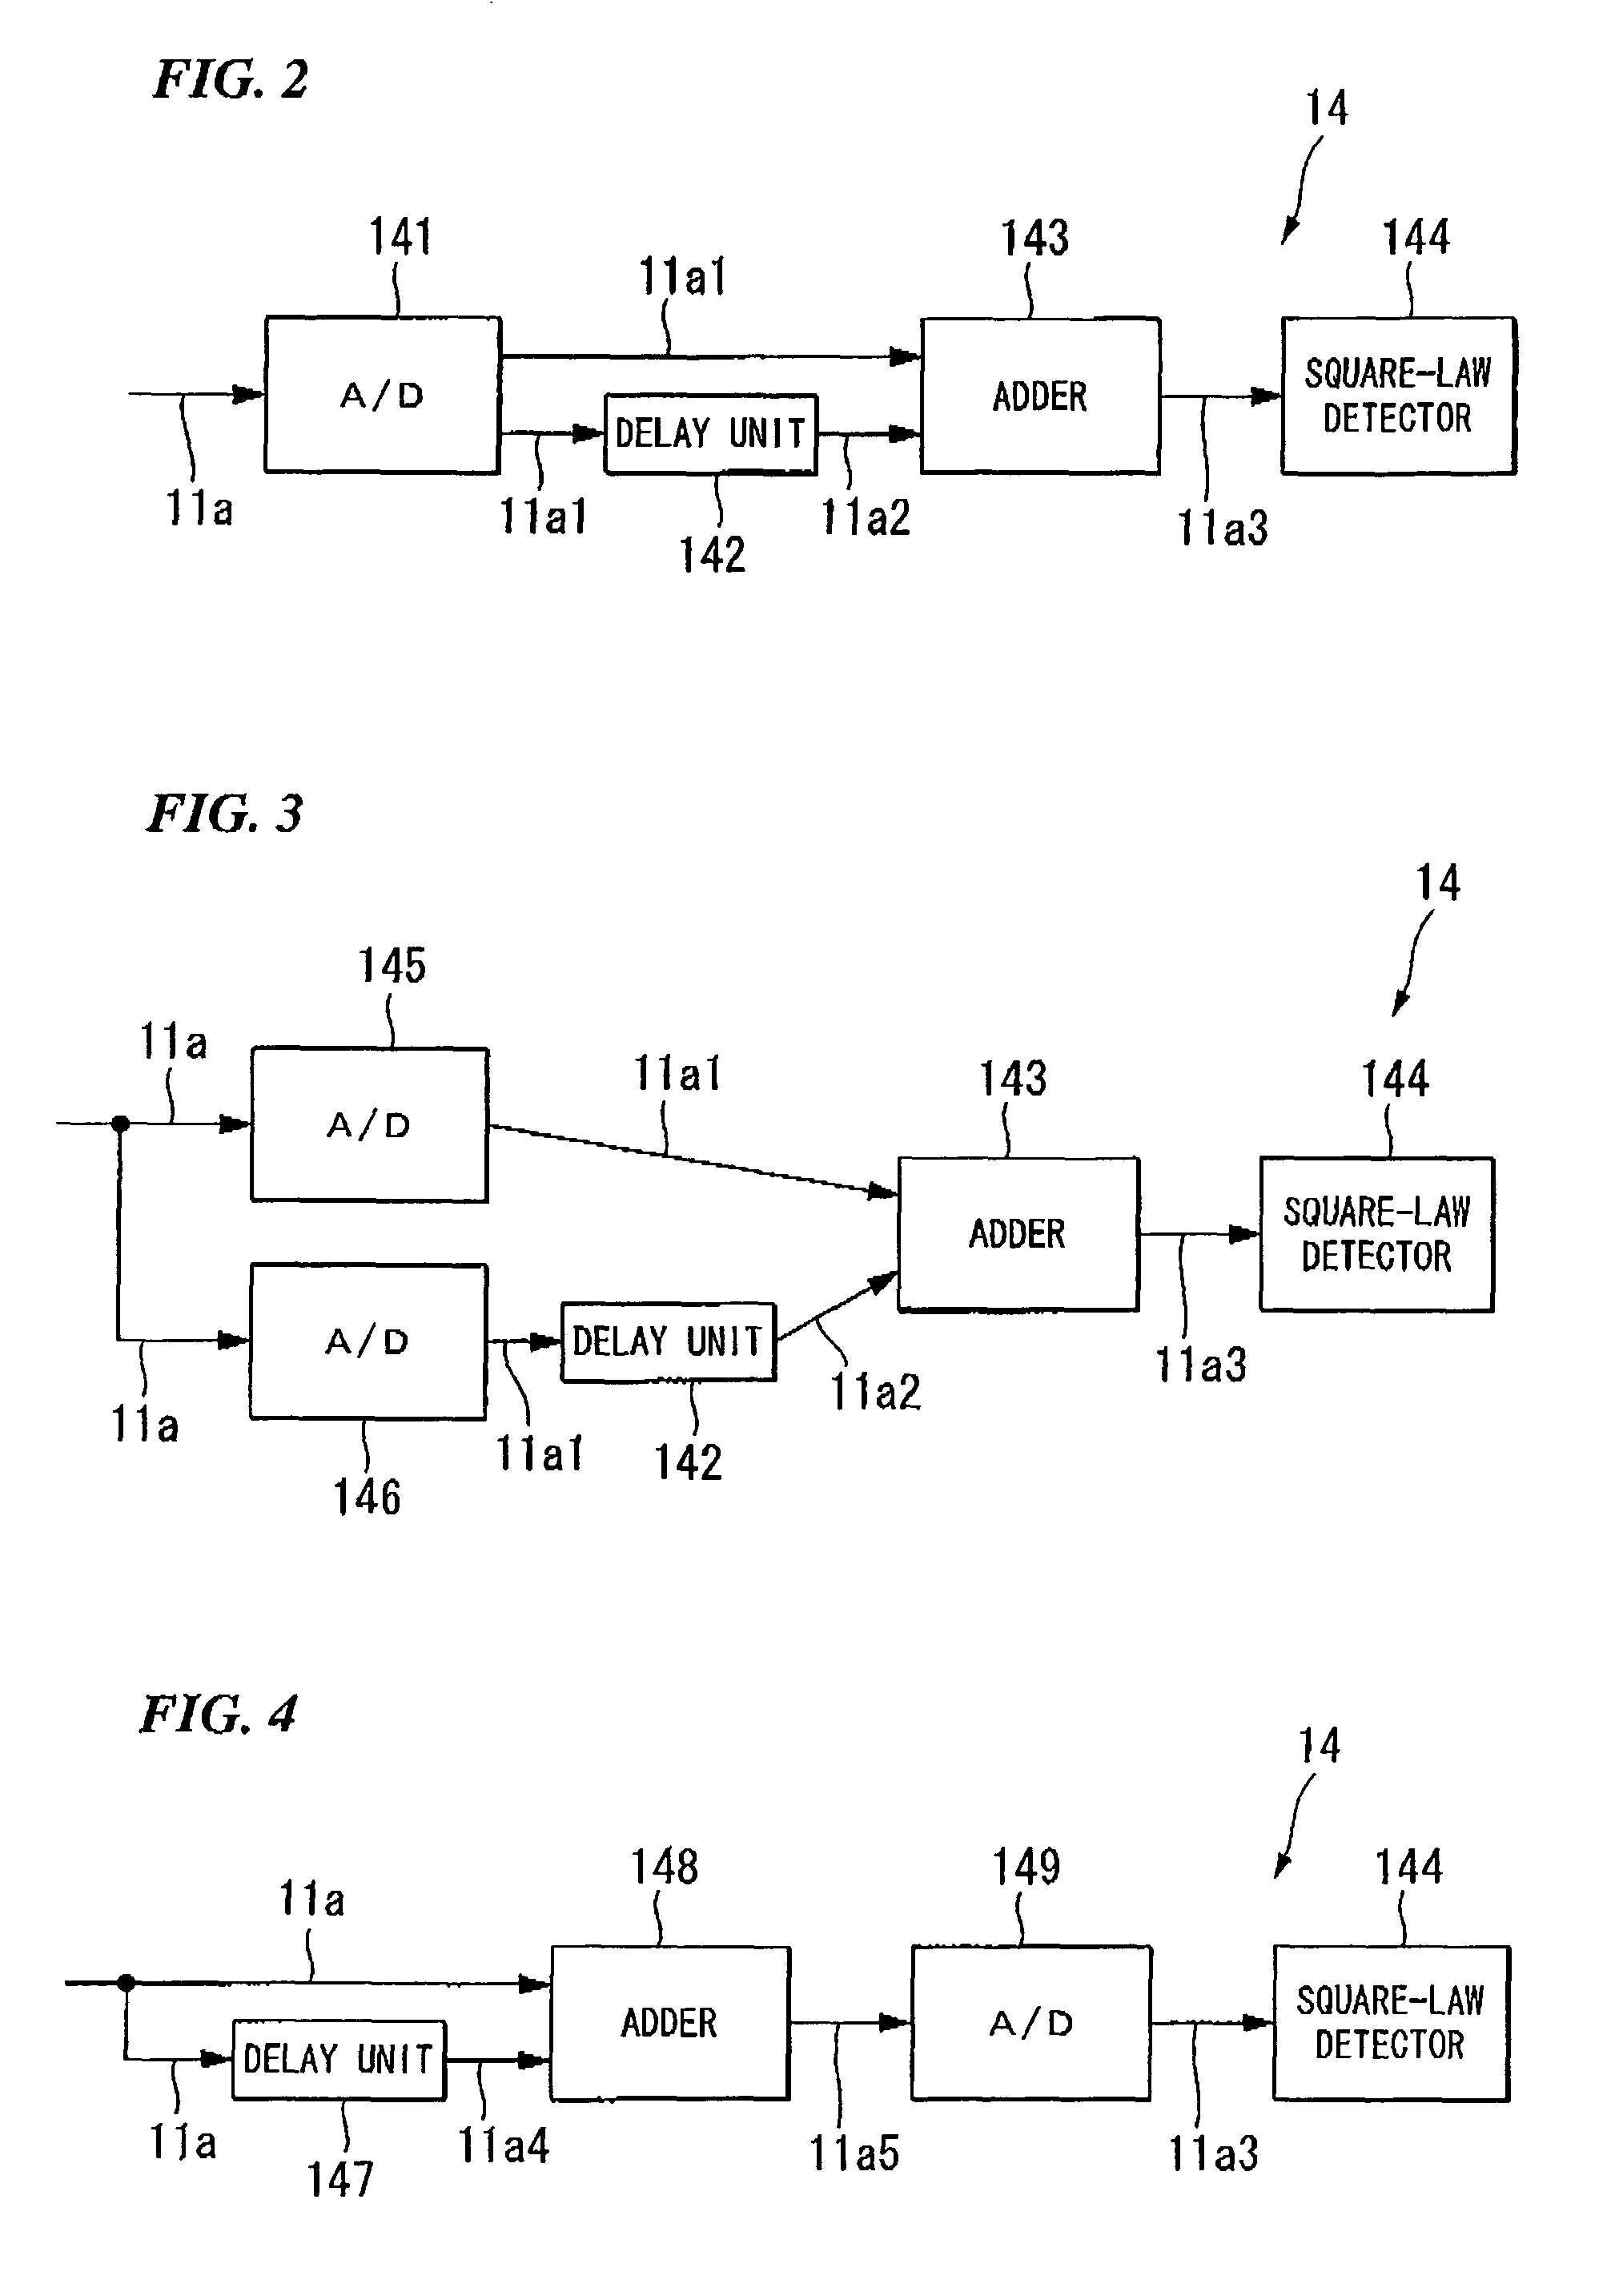 Apparatus for measuring the characteristics of an optical fiber